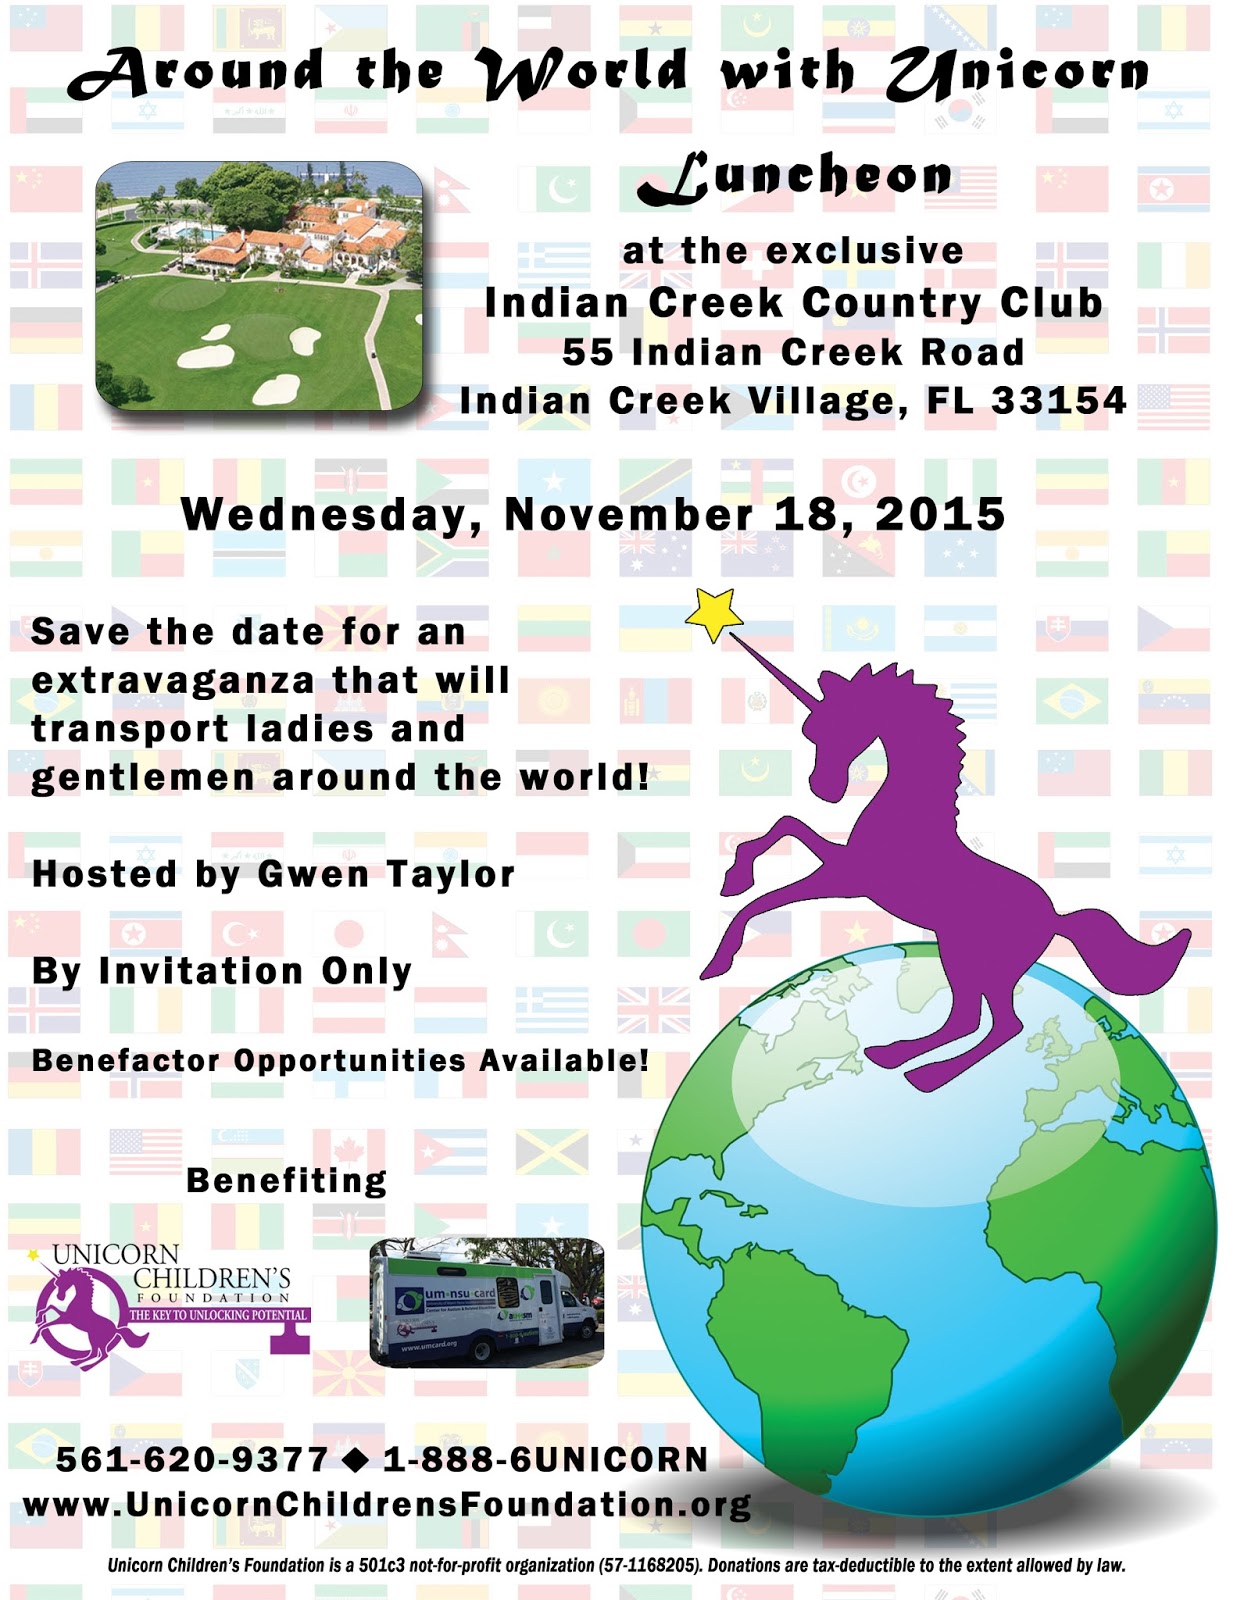 Unicorn Children's Foundation: Save the Date for Around the World with